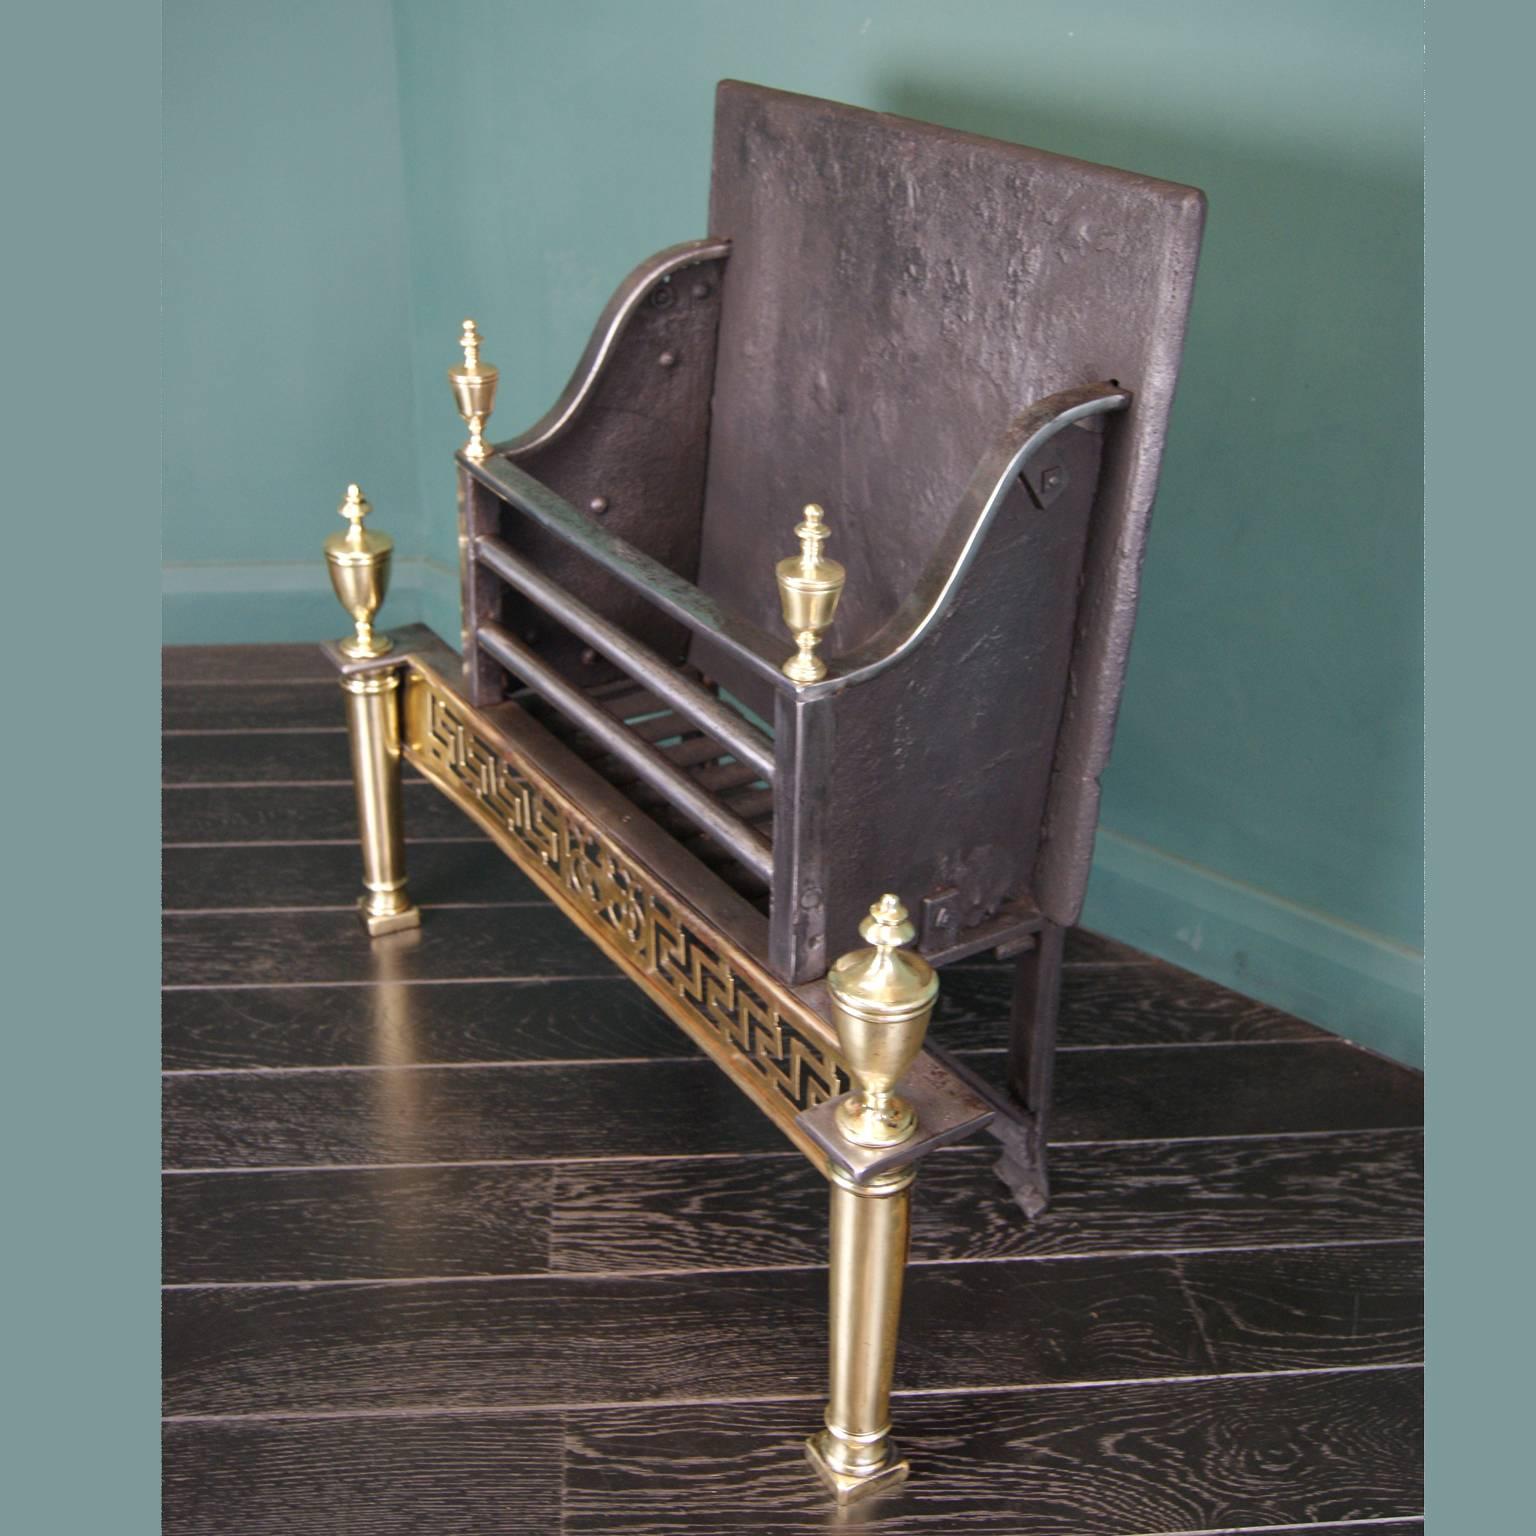 An elegant 19th century wrought and brass fire basket with plinth and column legs, a pierced Greek-key fret and urn finials uppermost. Rear elements include: Wrought iron grill and scrolled feet.